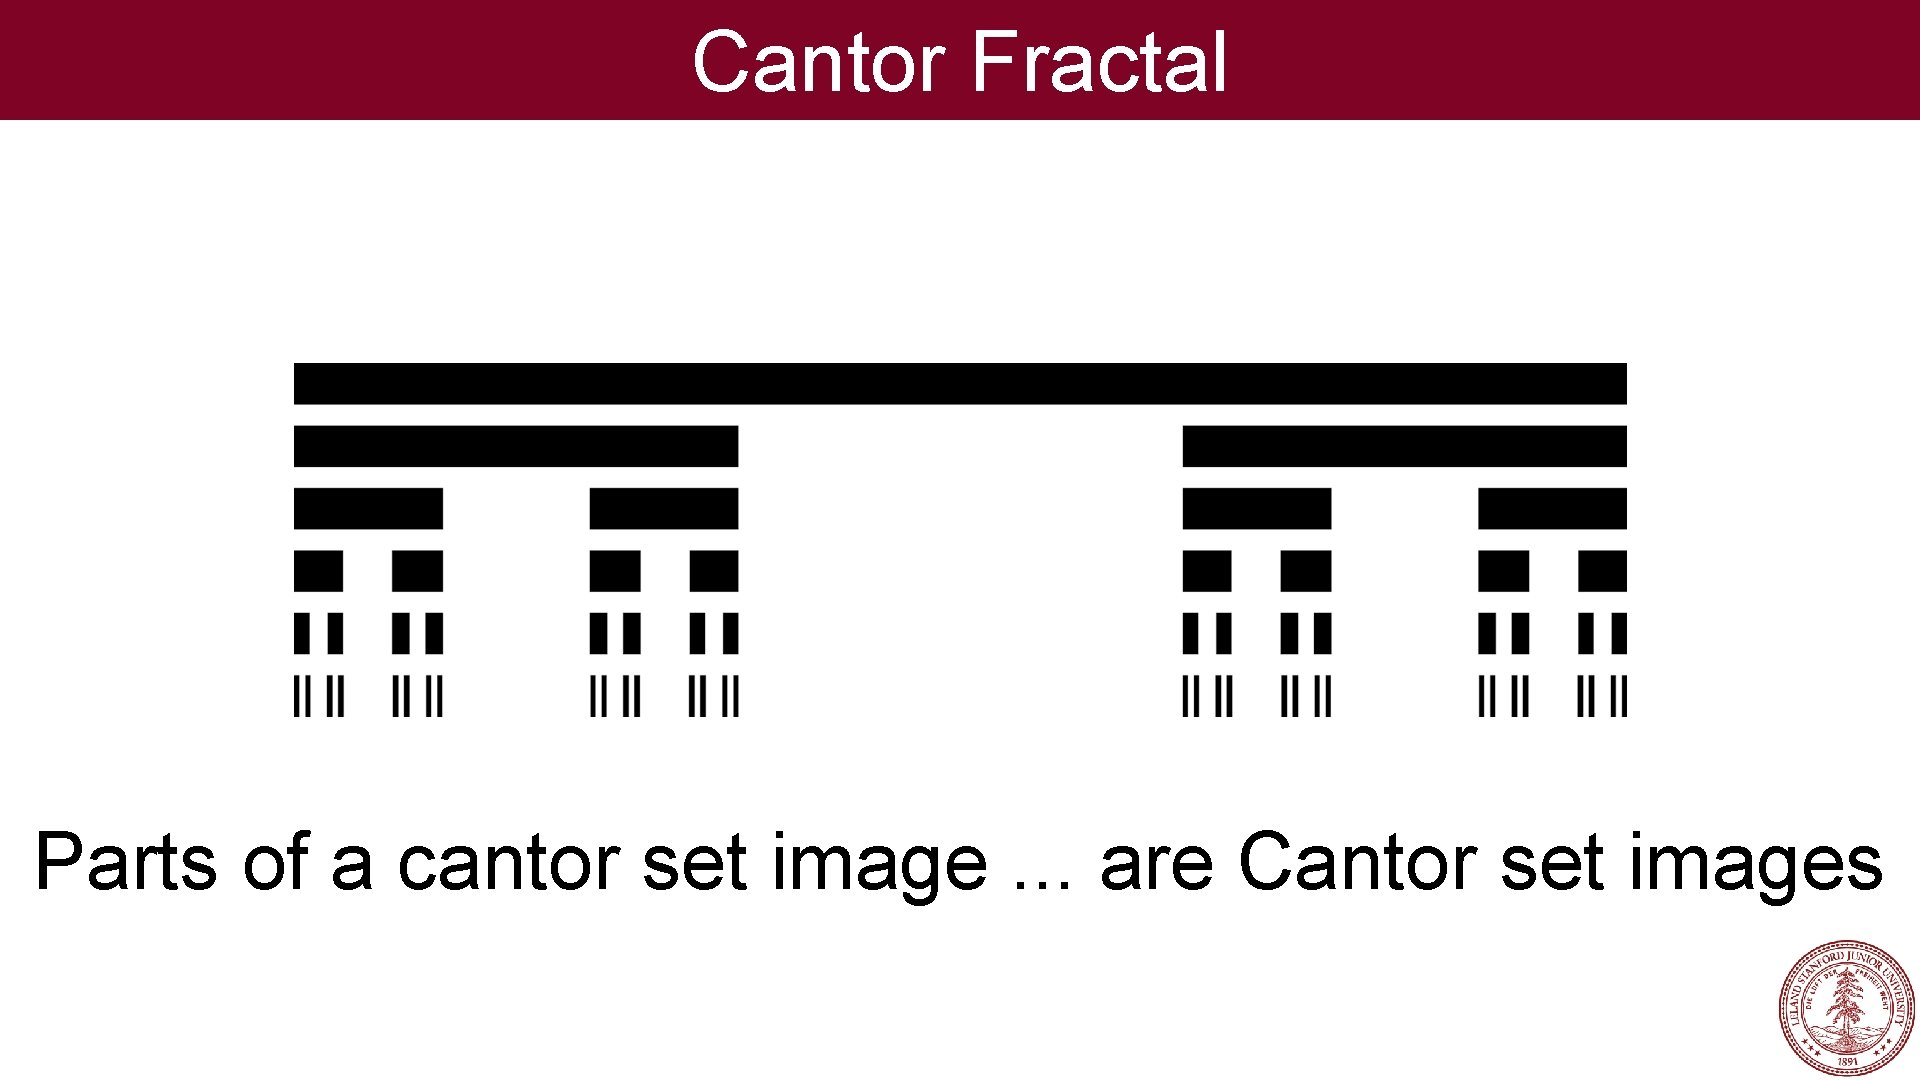 Cantor Fractal Parts of a cantor set image. . . are Cantor set images